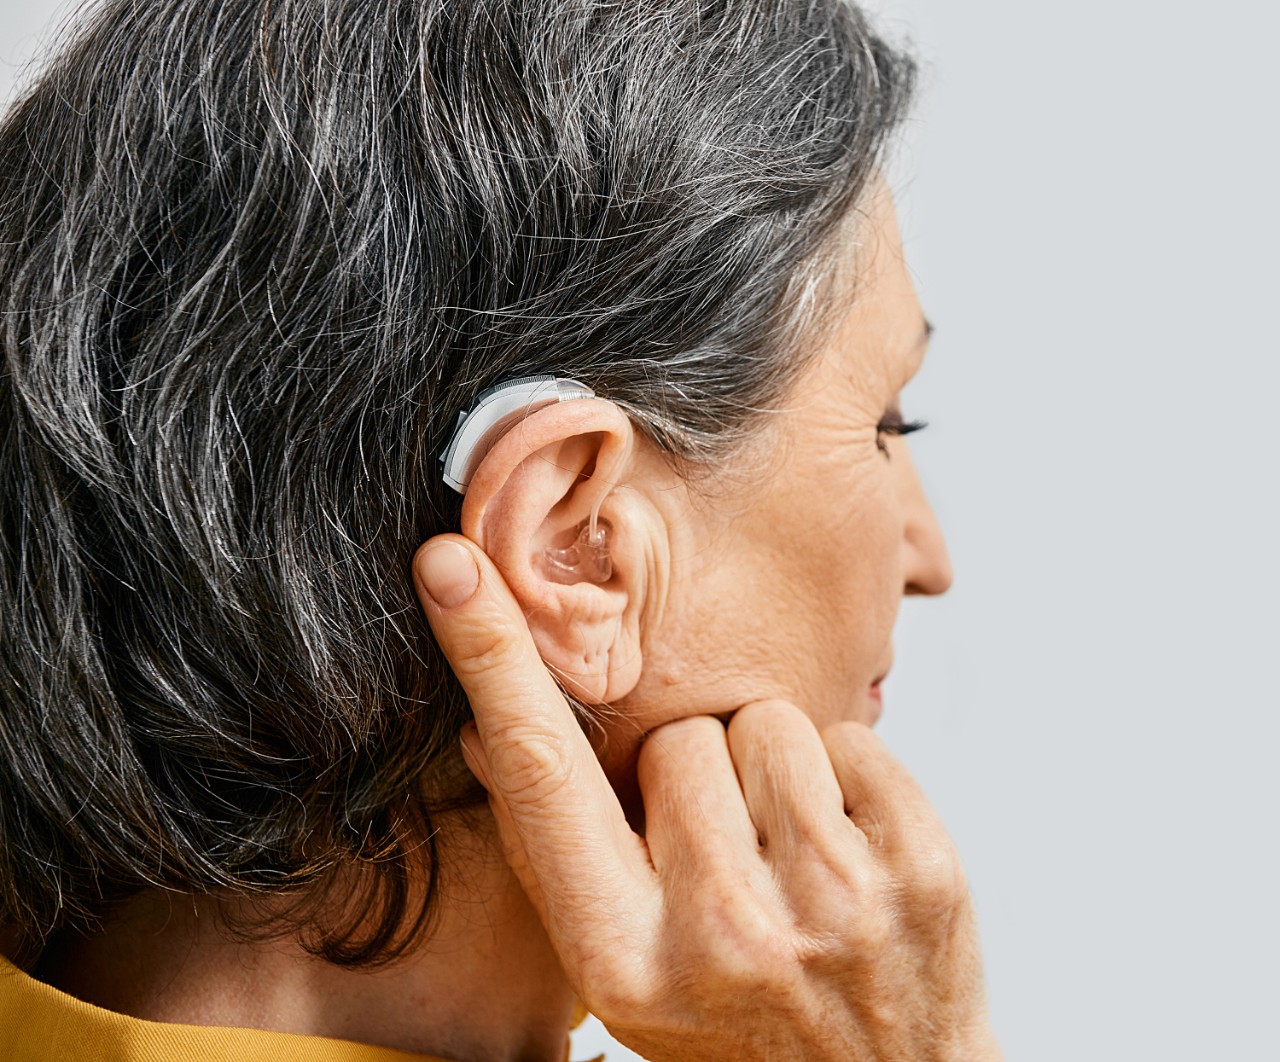 A woman from behind wearing a hearing aid on the right ear